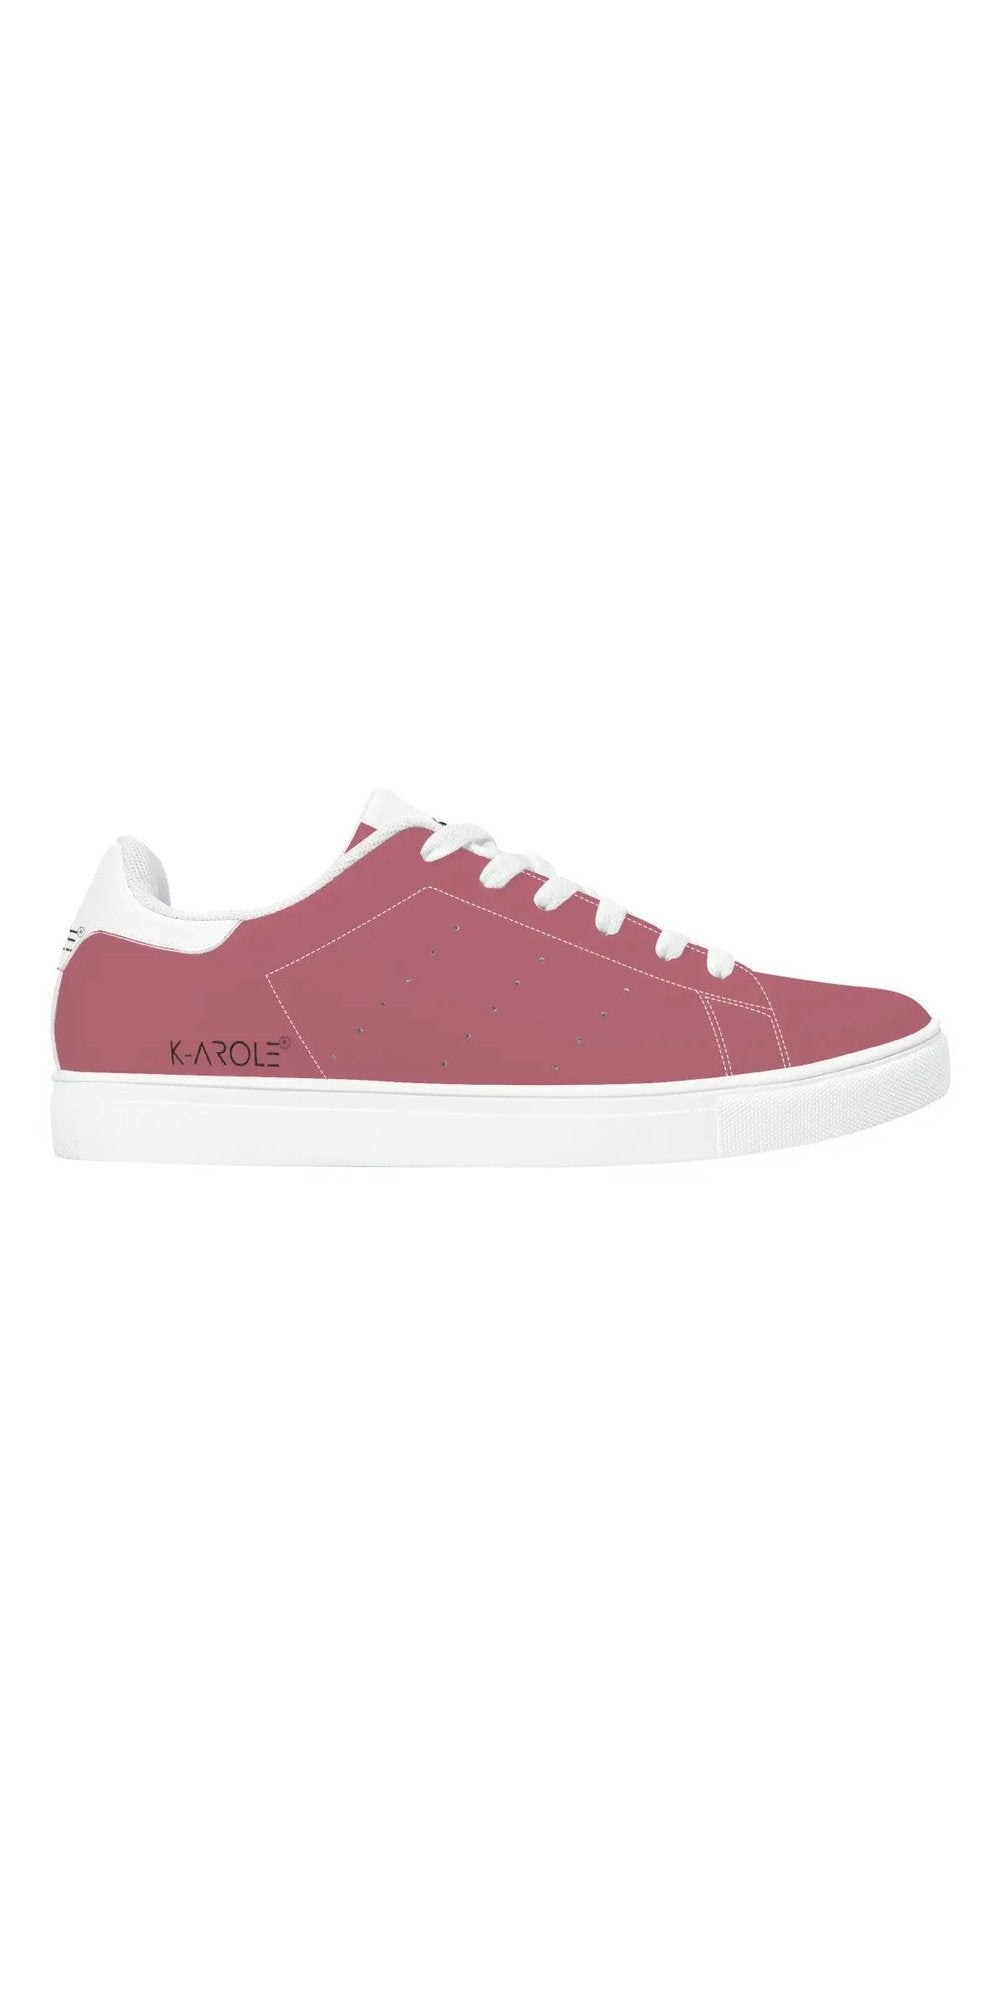 Skyline Low-Top Synthetic Leather Sneakers classic athletic shoes K-AROLE